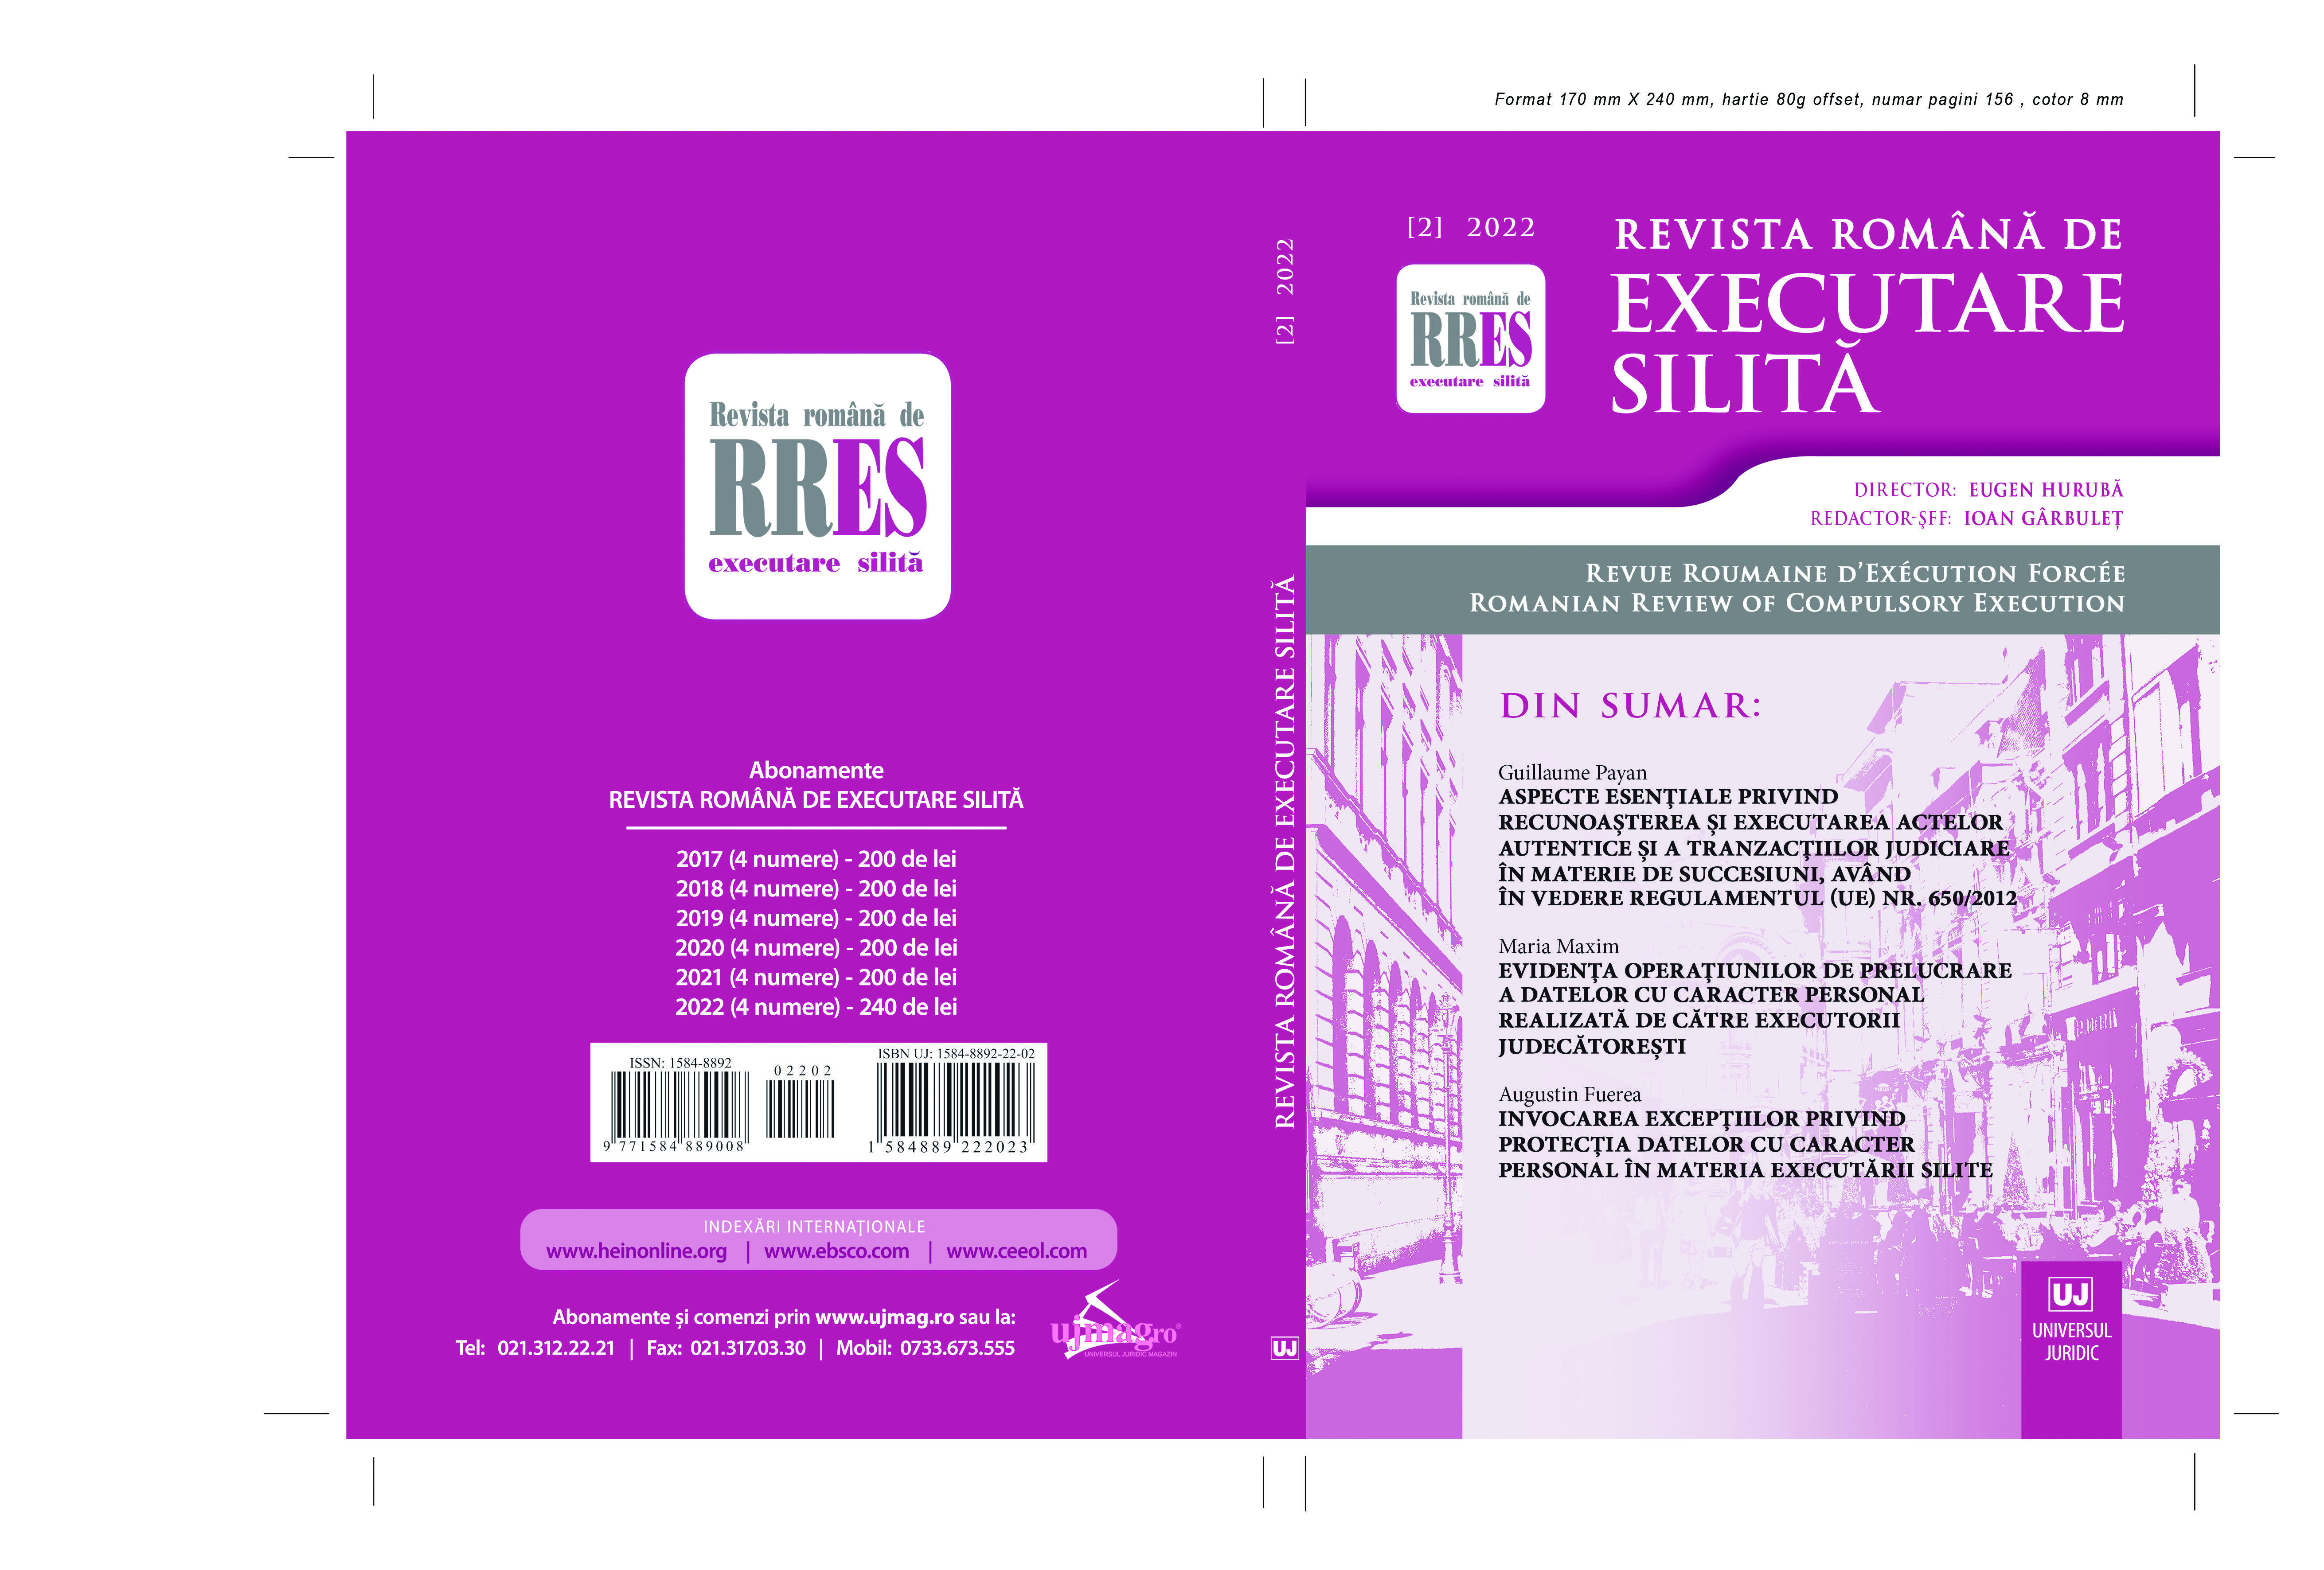 Invoking personal data protection exceptions in forced enforcement Cover Image